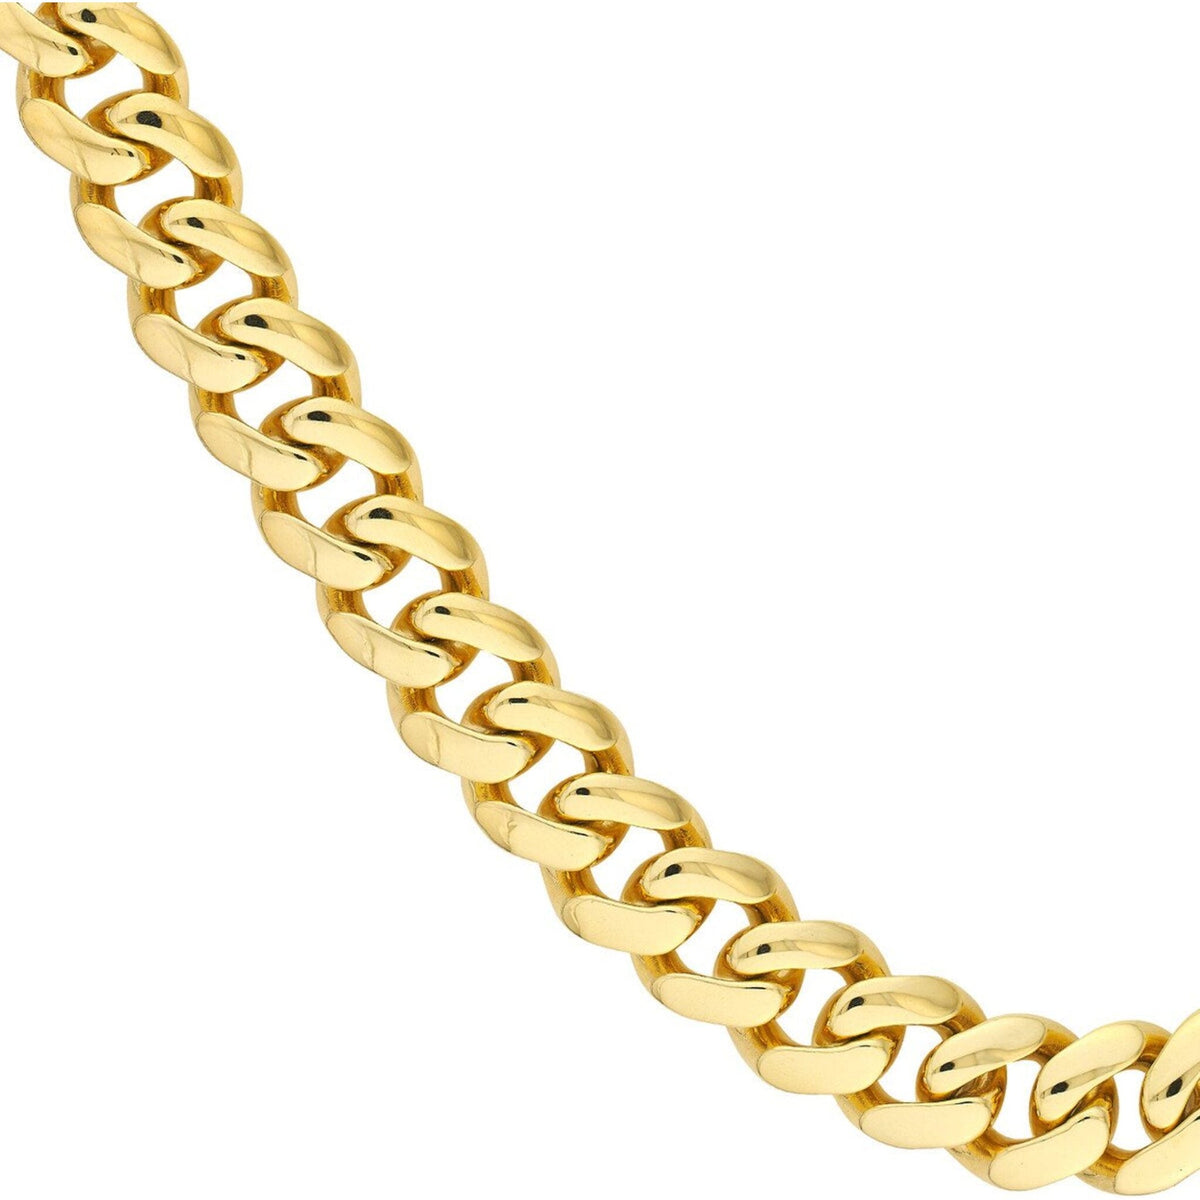 Elegant 18K Yellow Gold Necklace from Robinson's Jewelers